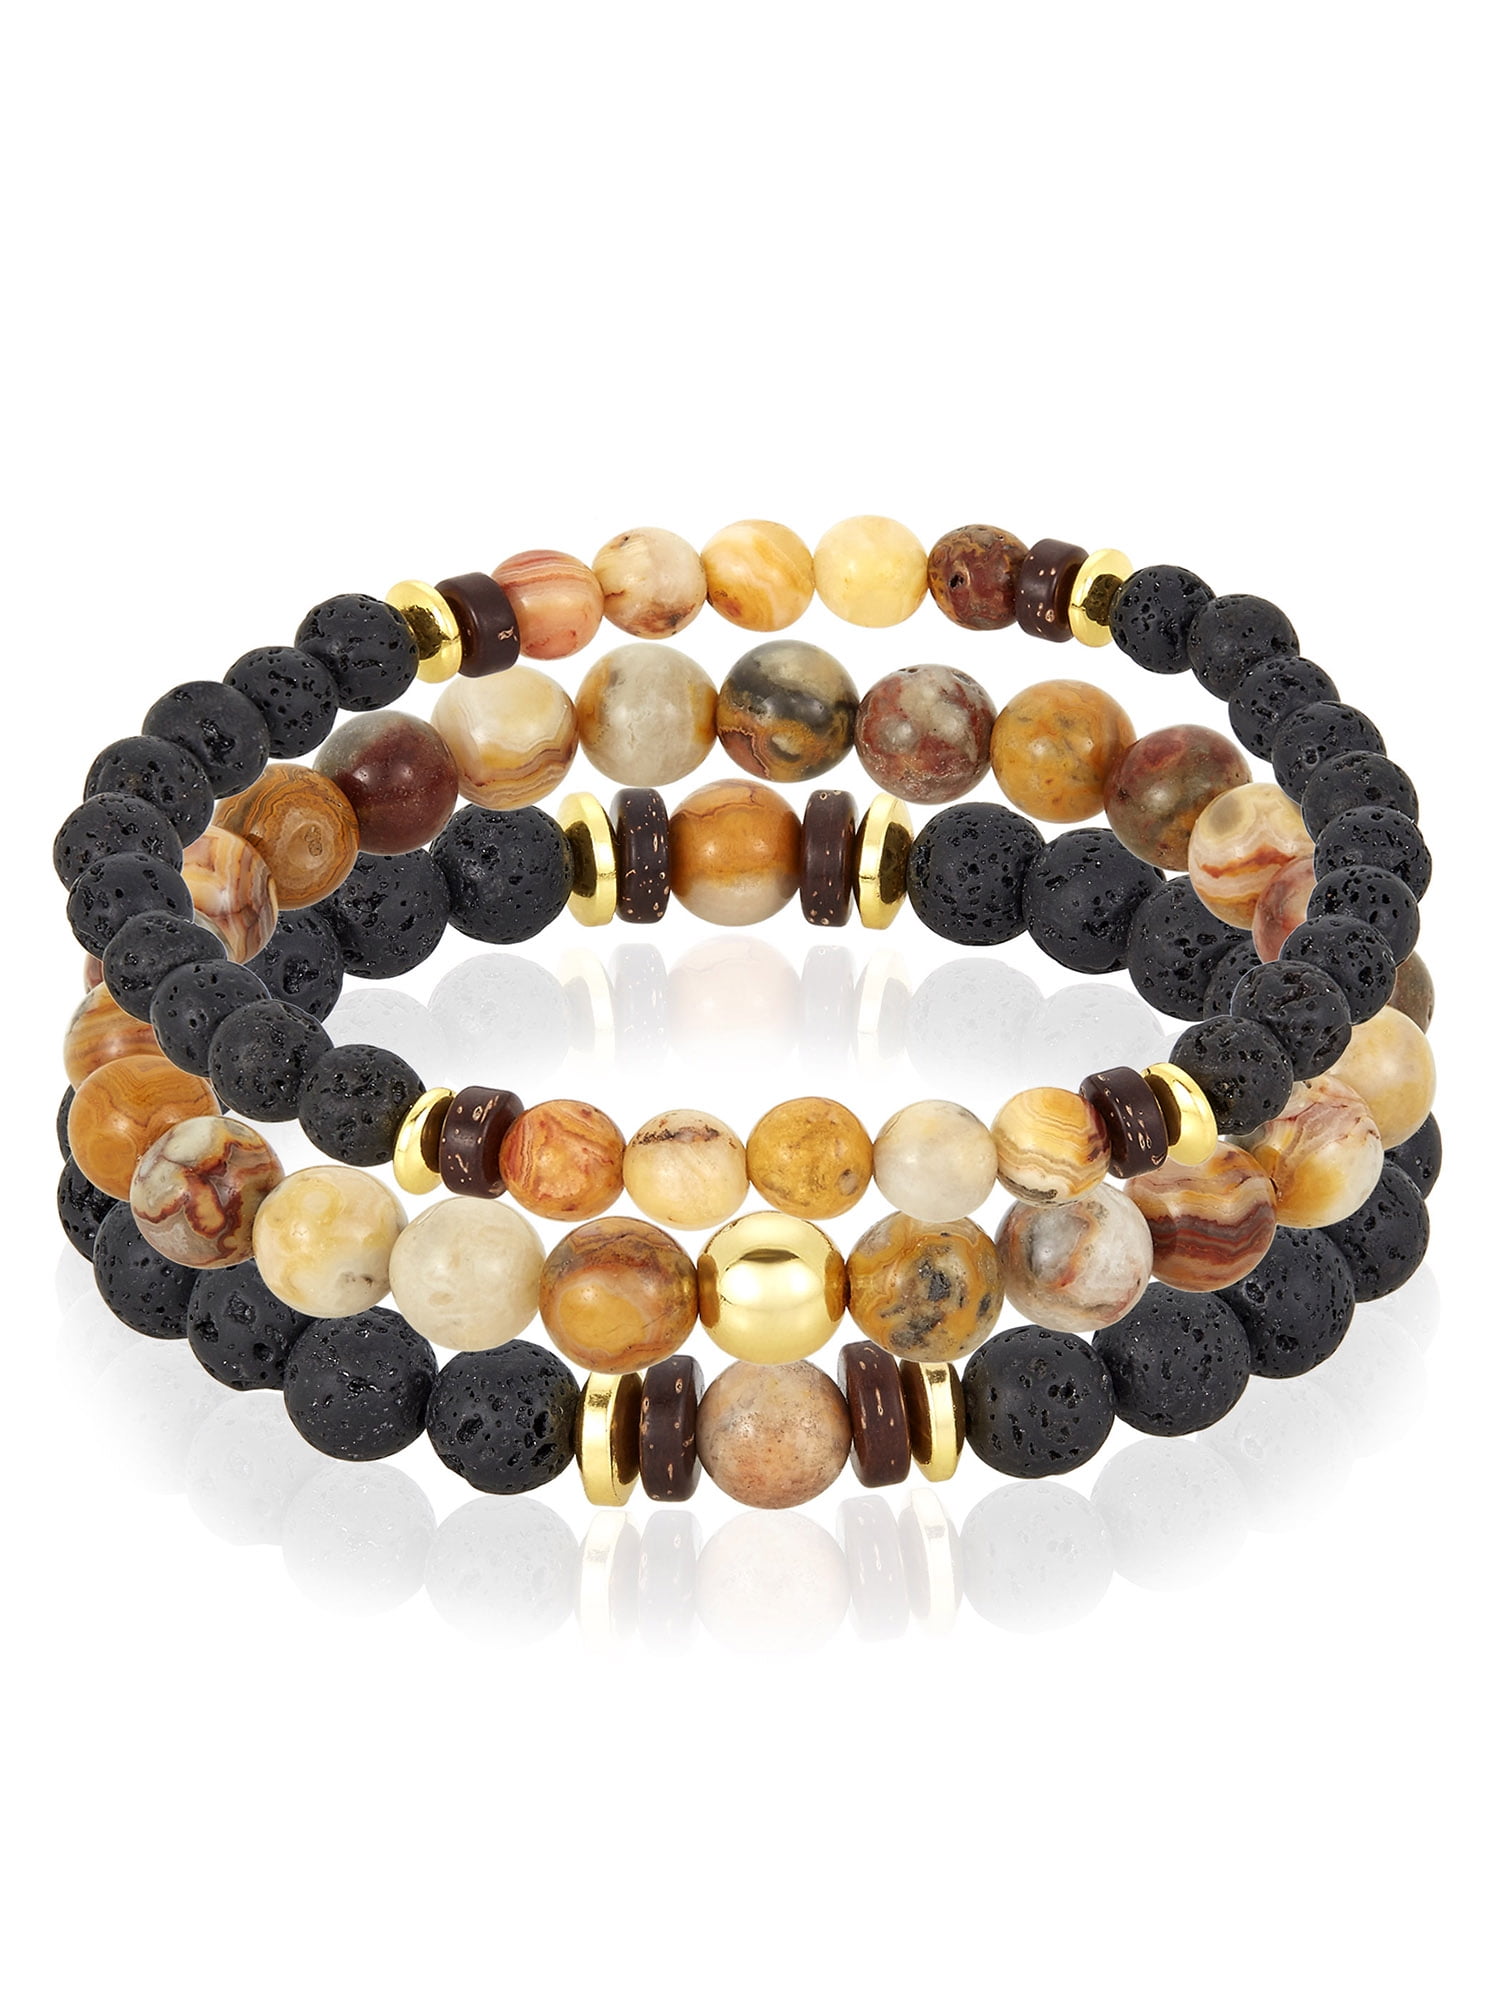 Natural Brown Crazy Agate Beads Healing Beaded Stretch Jewelry Bracelet 7" Gift 